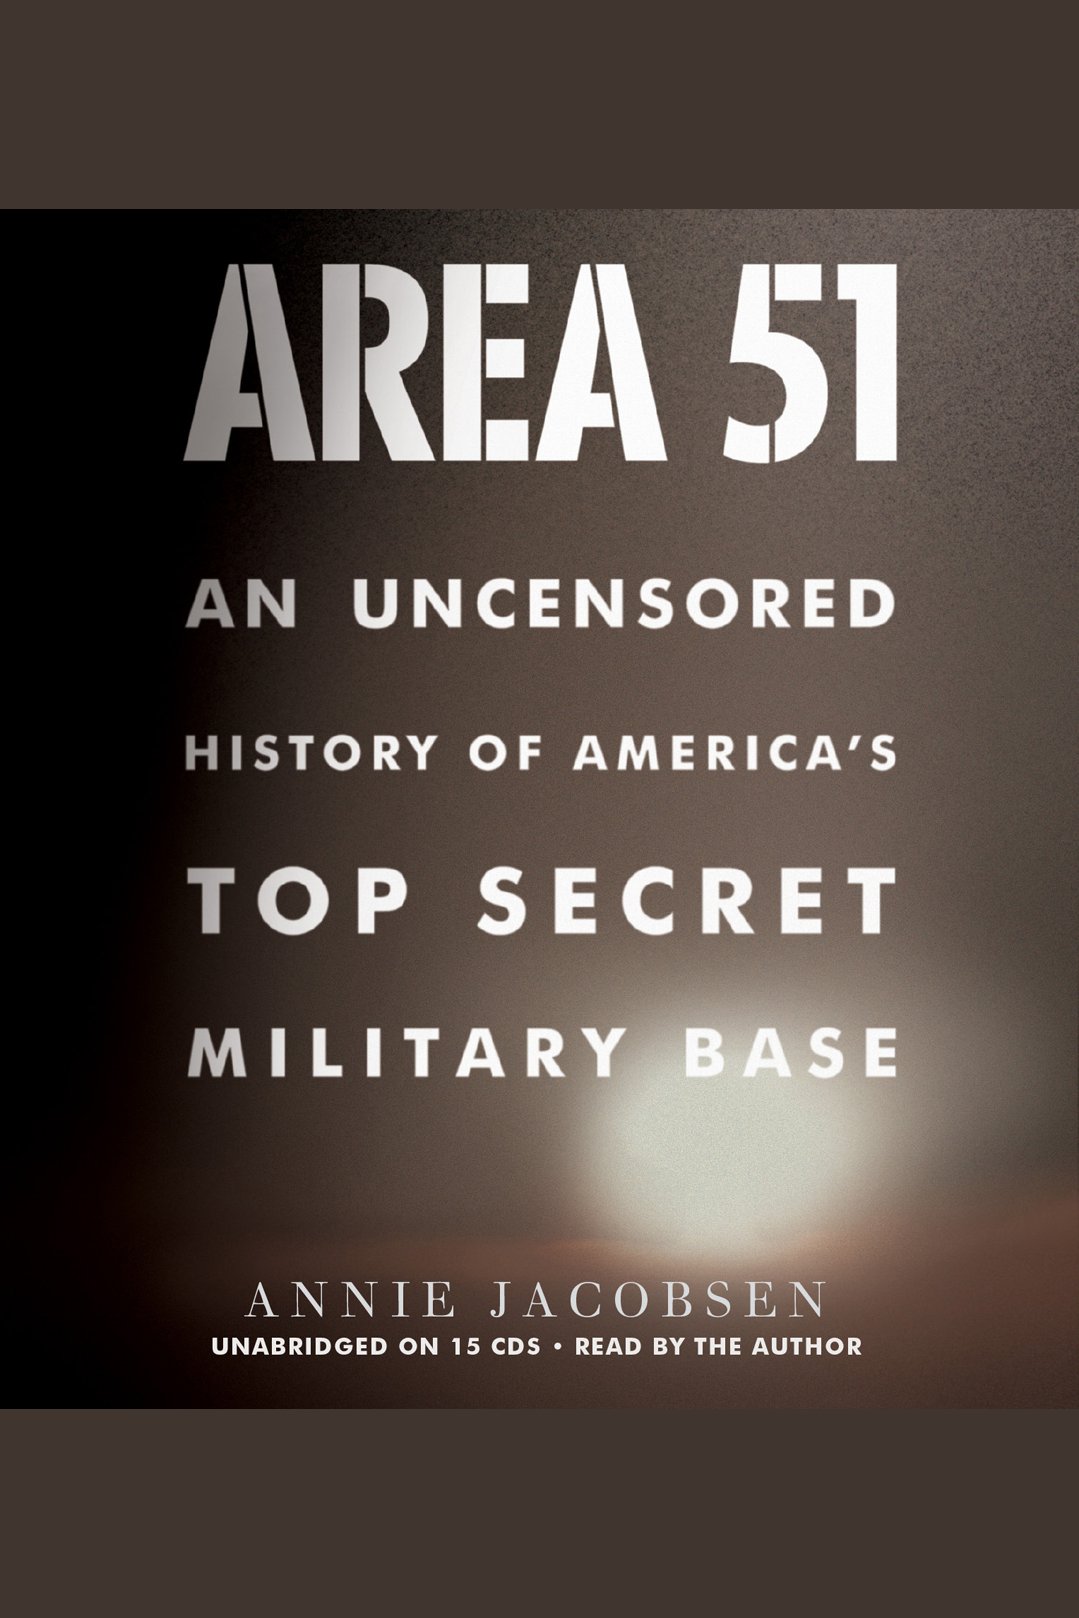 Area 51 an uncensored history of America's top secret military base cover image